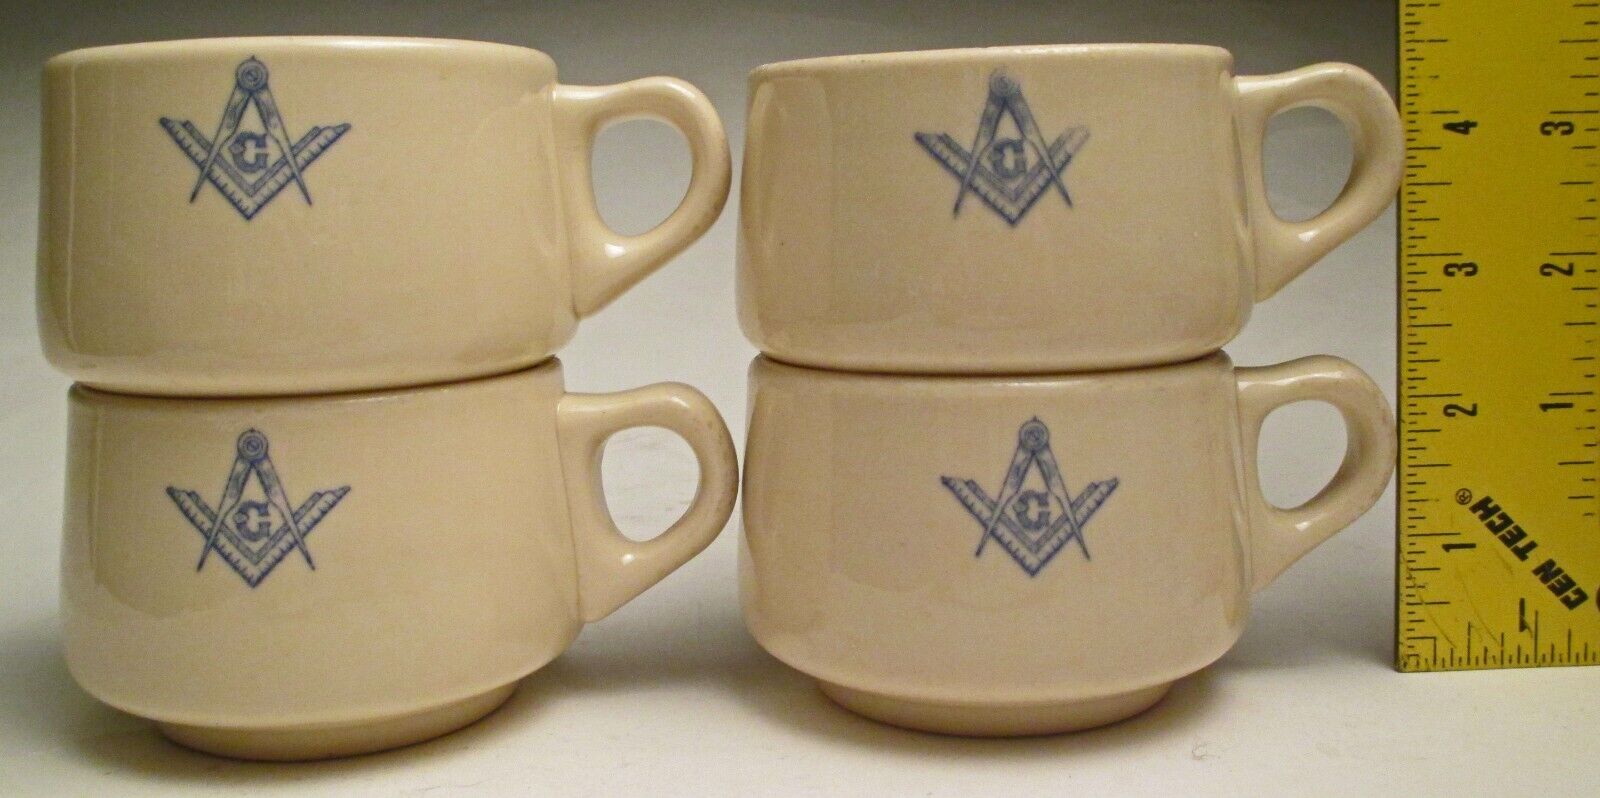 Antique Masonic Temple & Eastern Star set 4 Coffee Cup / Mugs by McNicol Roloc